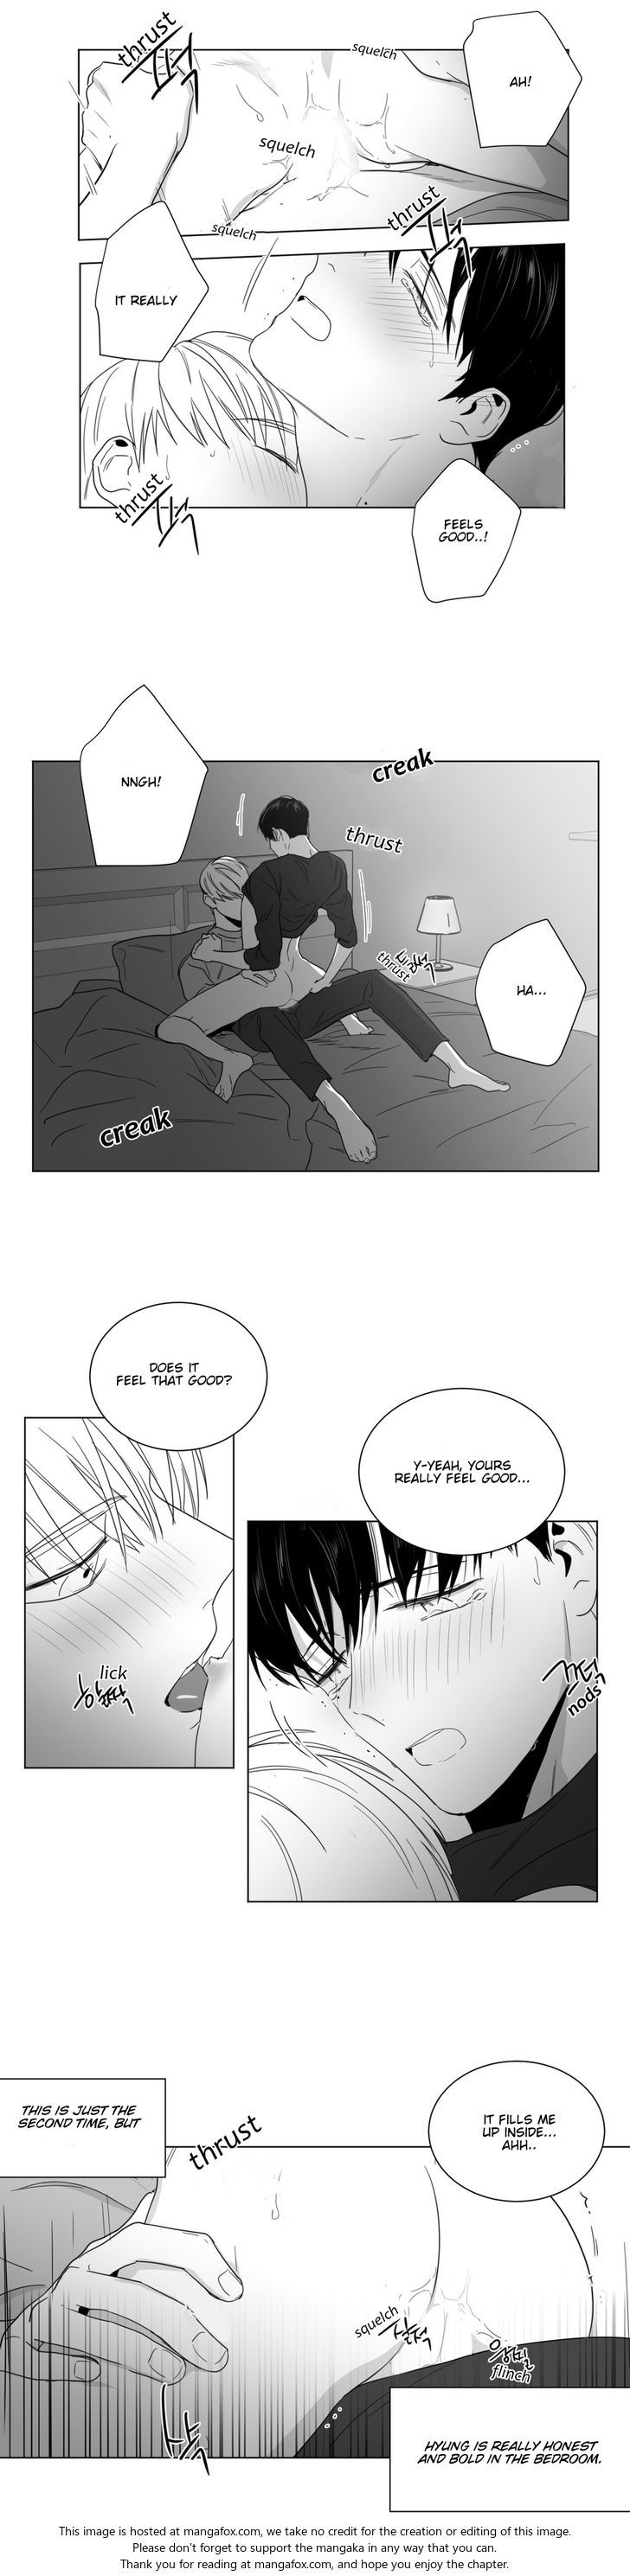 Lover Boy (Lezhin) Chapter 019 page 14